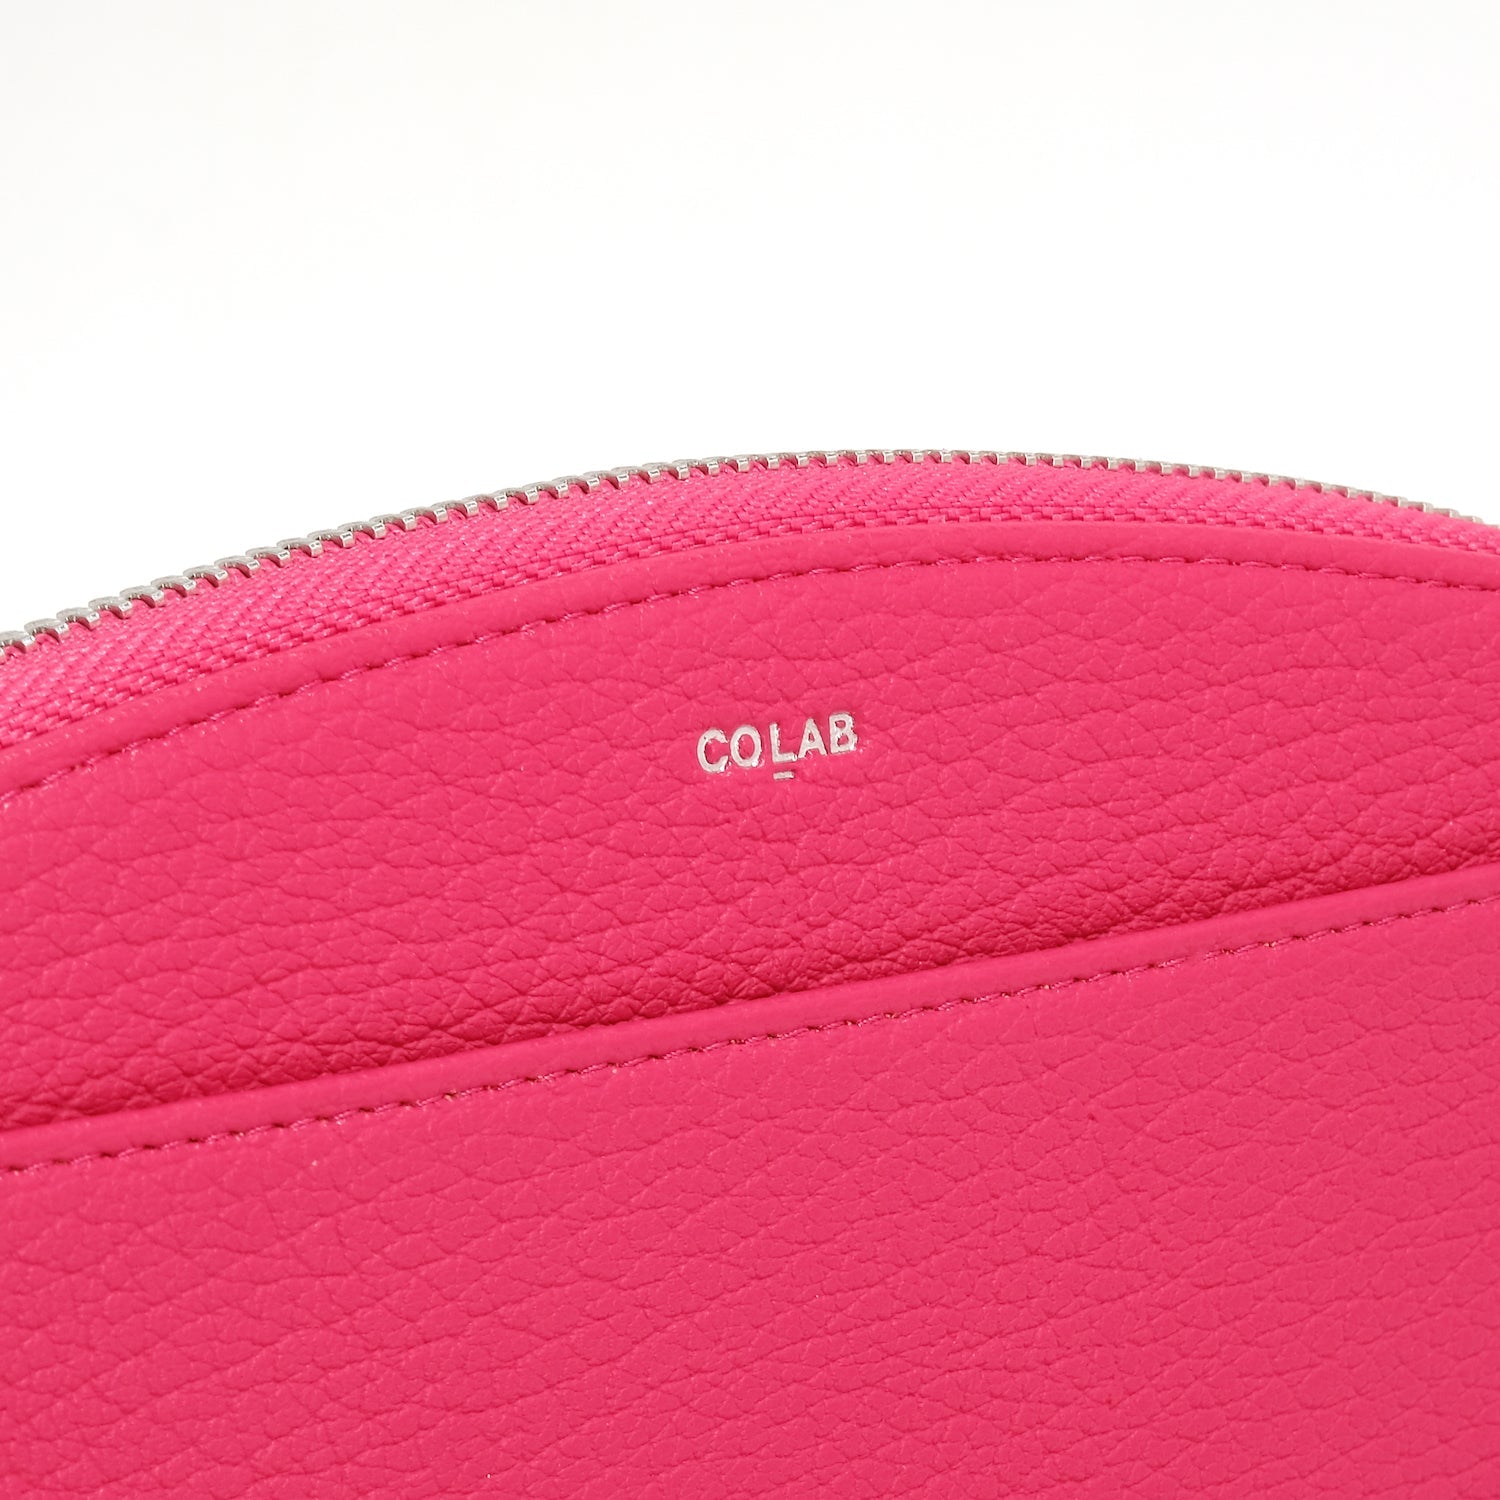 co-lab Isla Curved Wallet - Beetroot Accessories - Other Accessories - Handbags & Wallets by co-lab | Grace the Boutique